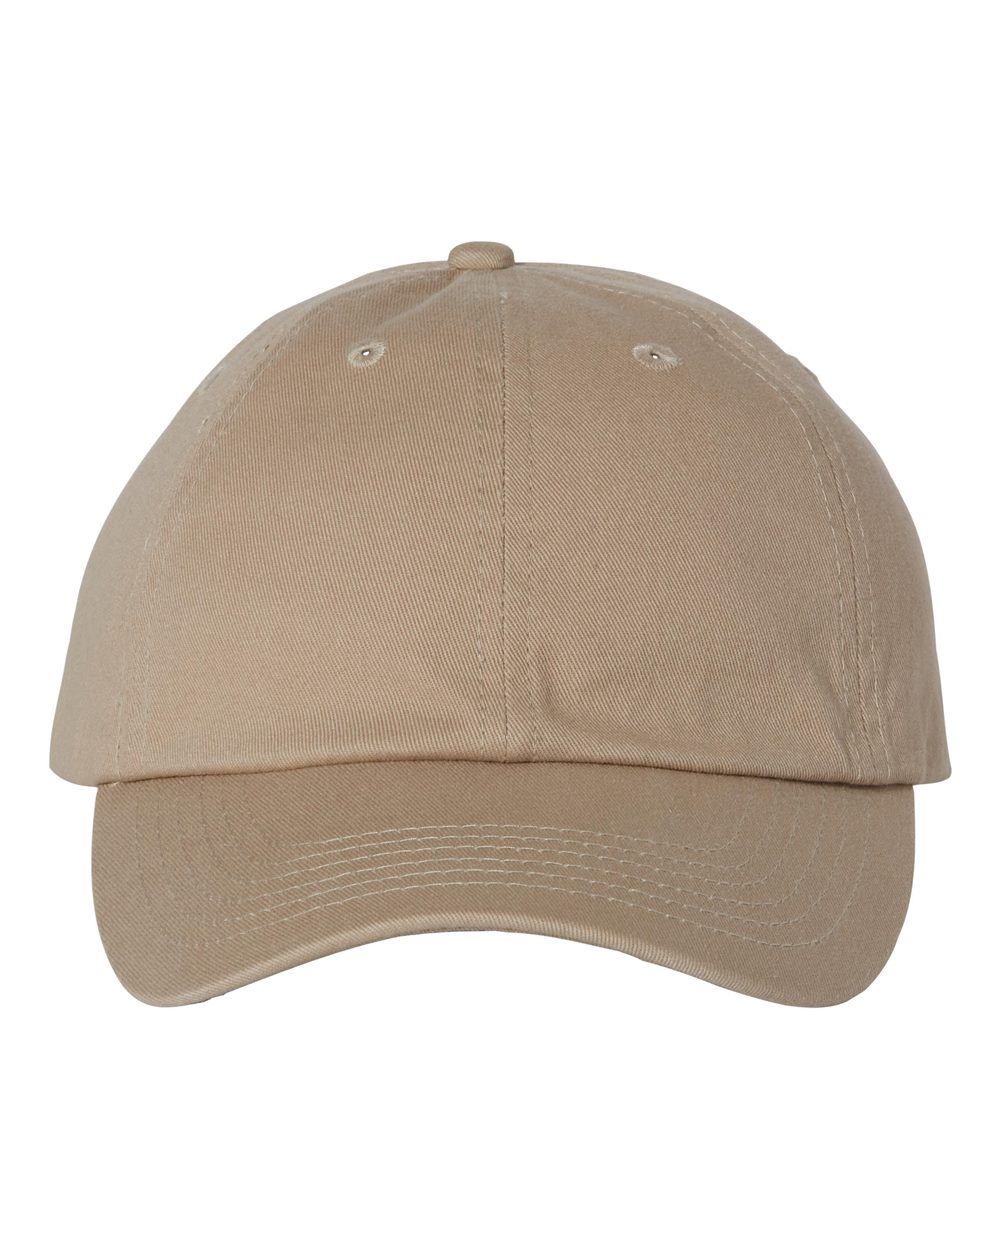 Embroidered Hats, No Minimums! "We love them! Thanks!!" - Nottingham Embroidery